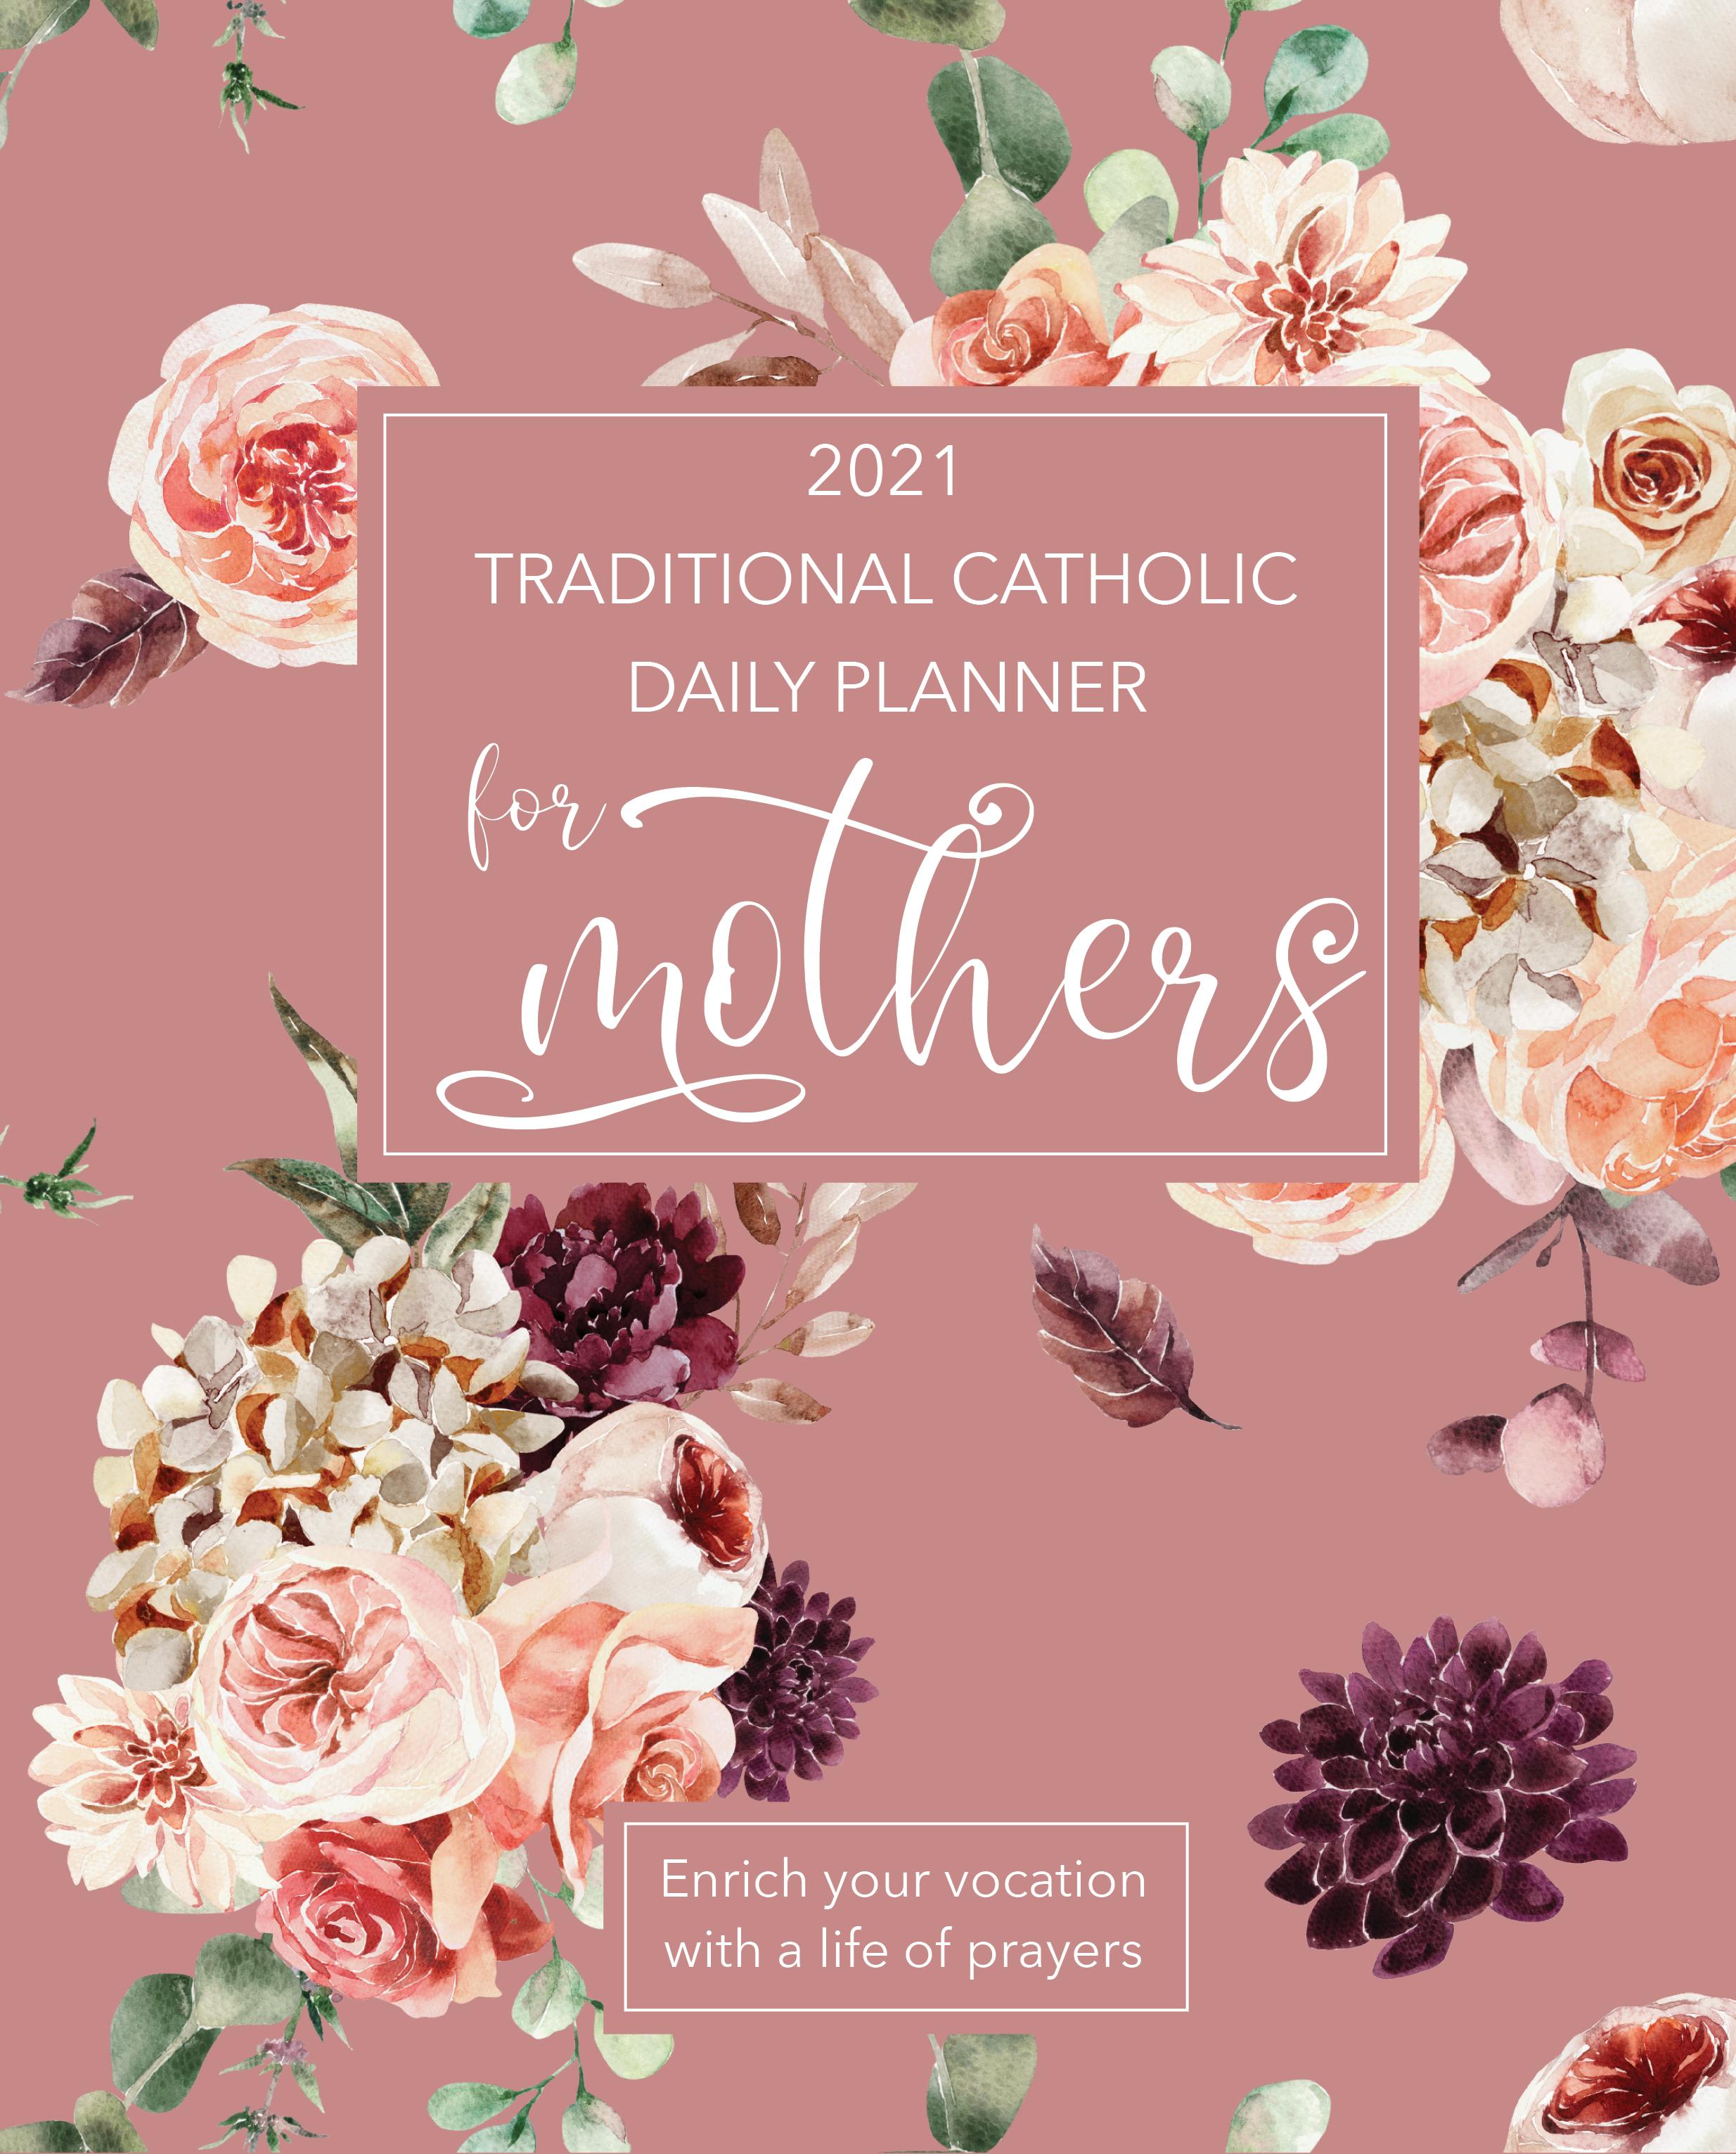 We are now on Amazon! 2021 Traditional Catholic Planner for Mothers now